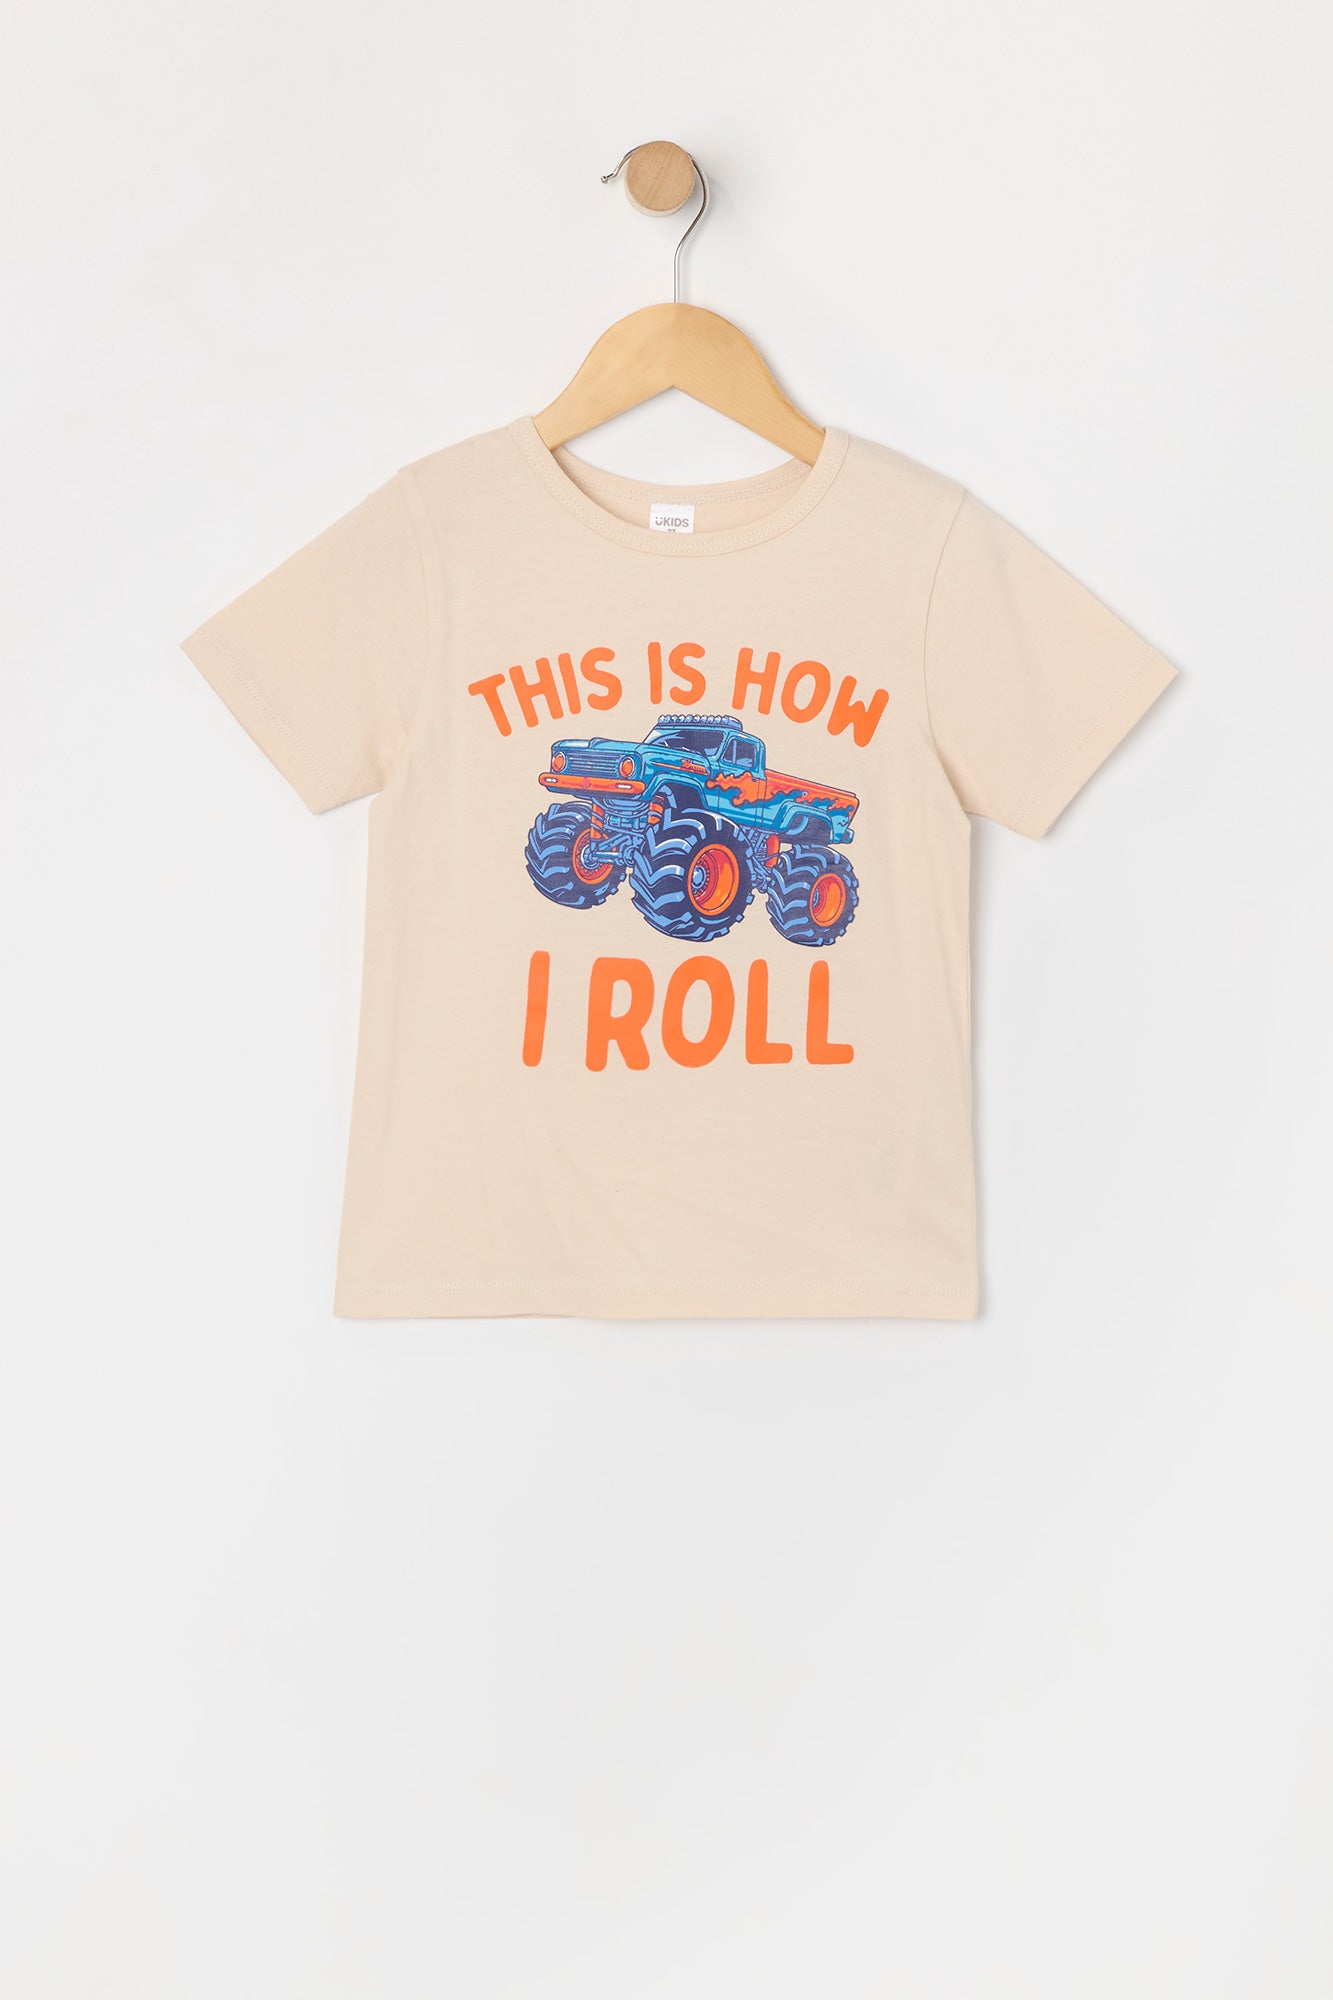 Toddler Boy How I Roll Graphic T-Shirt